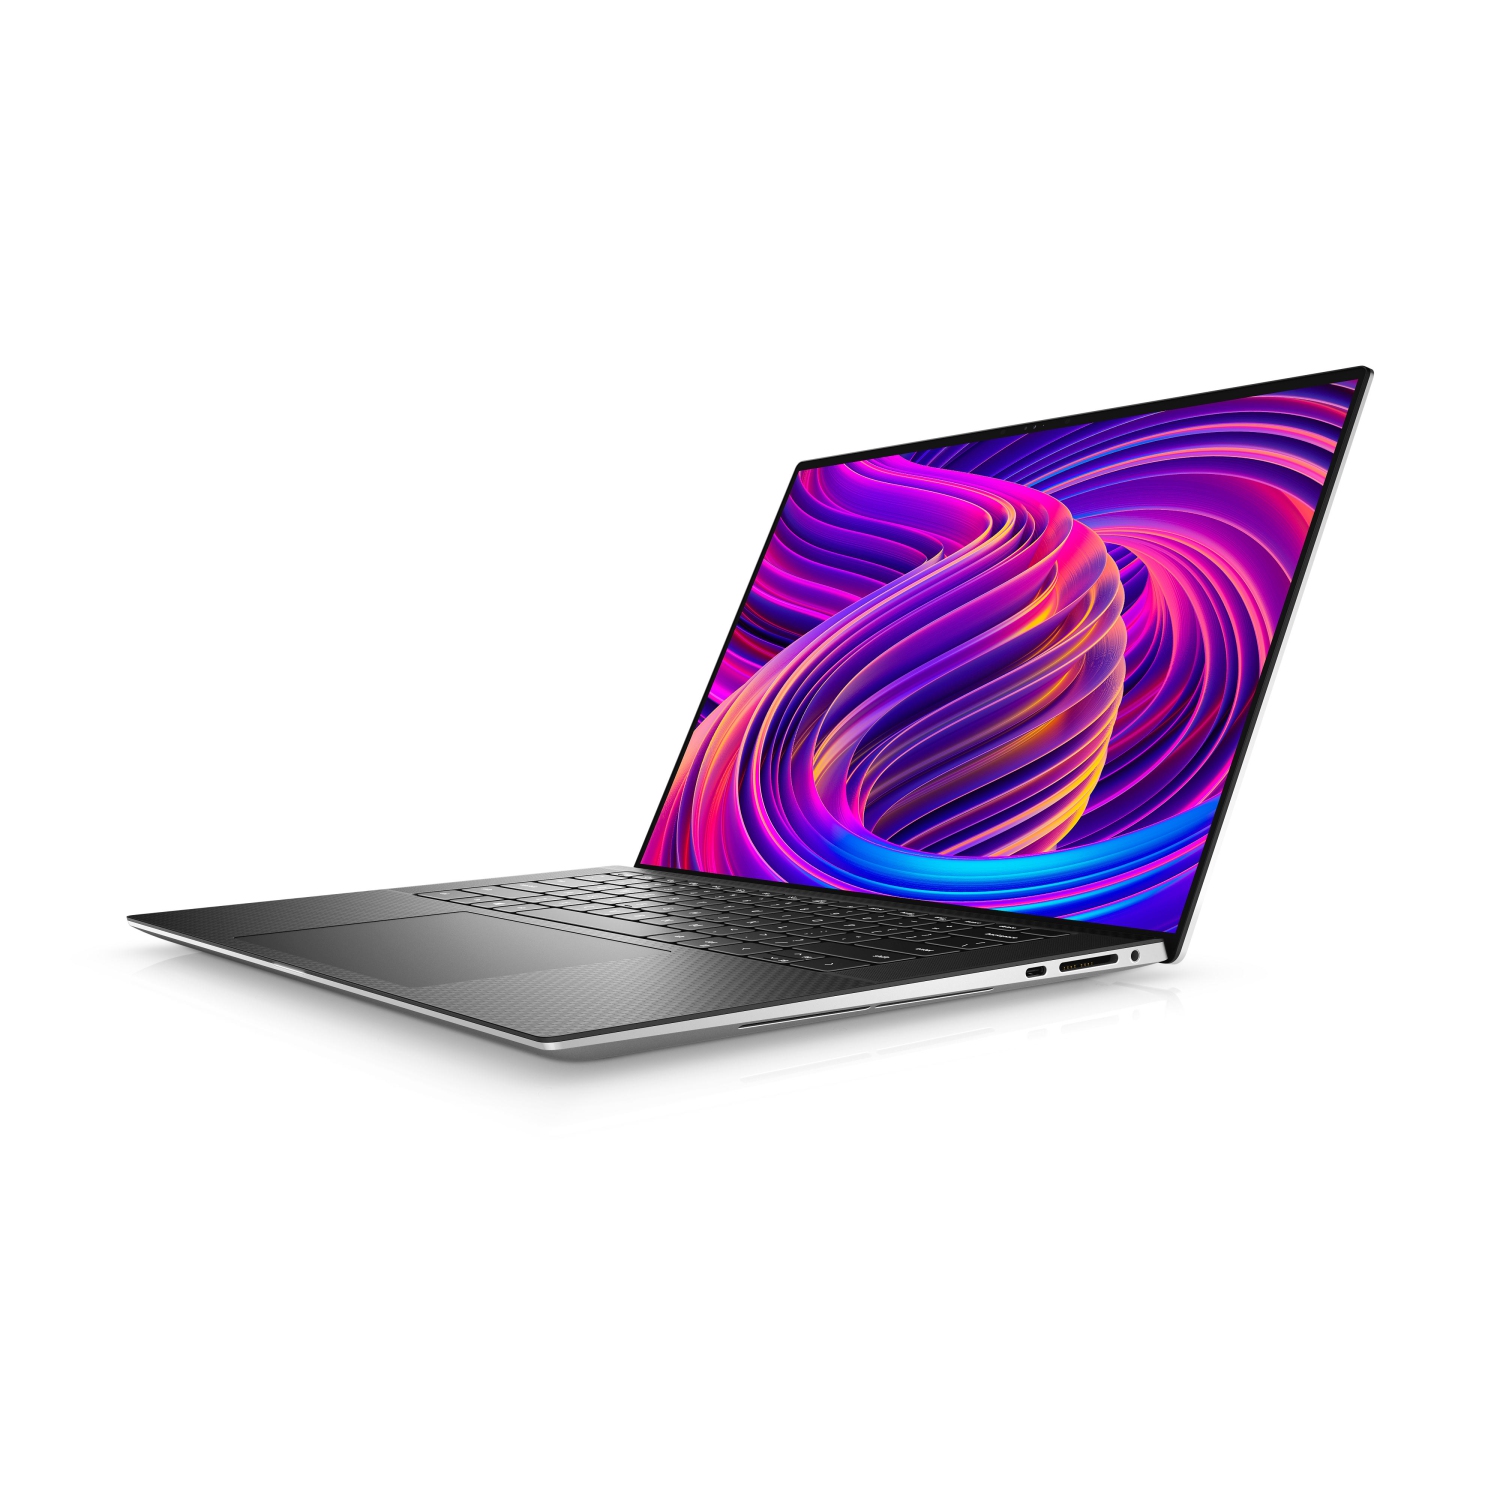 Refurbished (Excellent) - Dell XPS 15 9510 Laptop (2021), 15.6" 4K Touch, Core i7, 512GB SSD, 32GB RAM, RTX 3050, 8 Cores @ 4.6 GHz, 11th Gen CPU Certified Refurbished